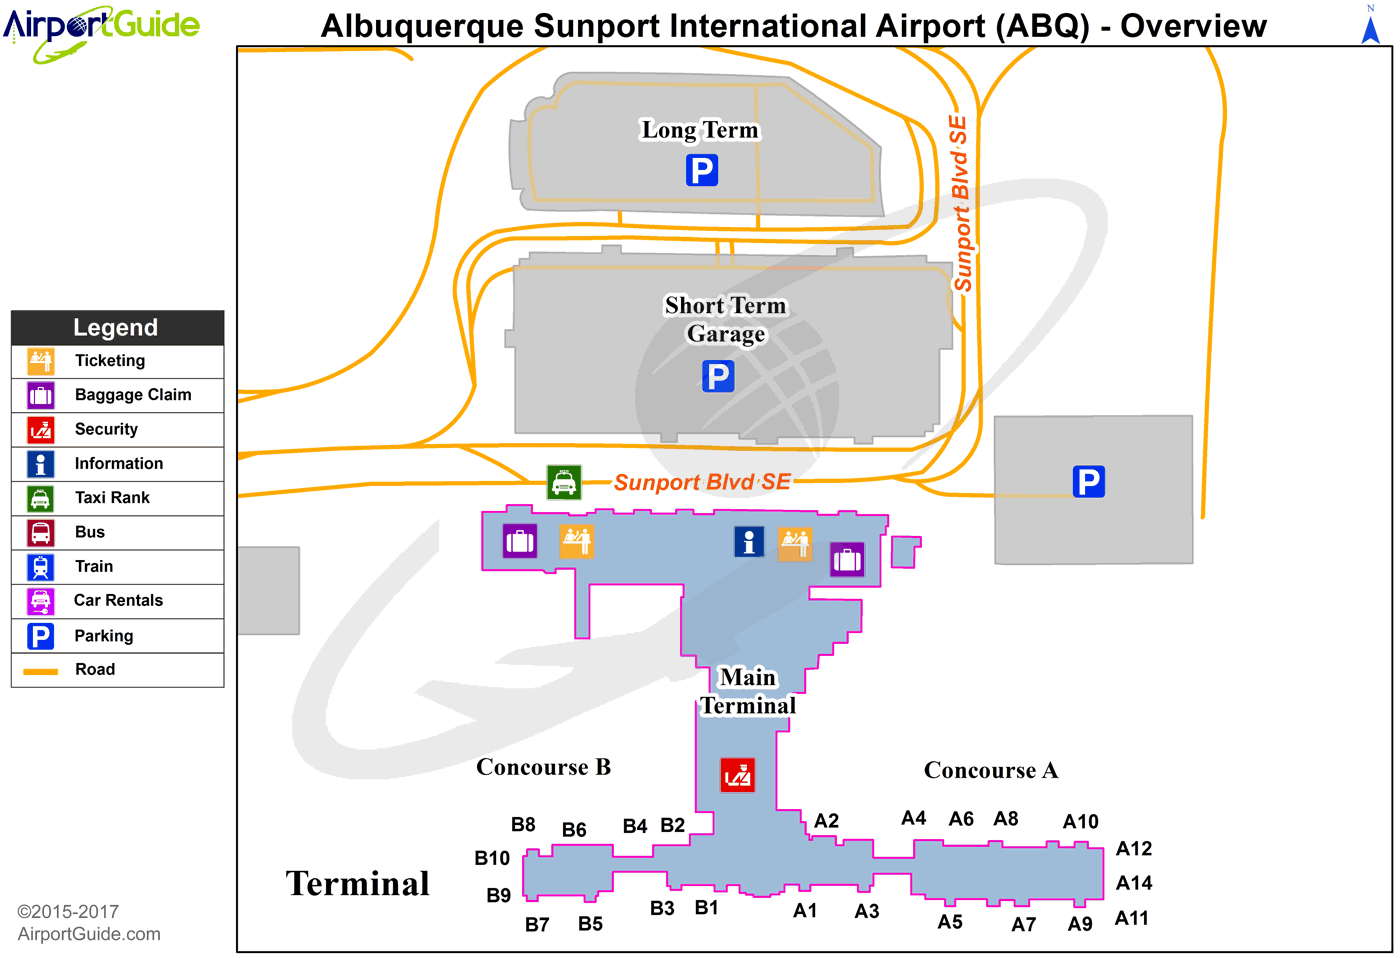 ABQ Overview Map 